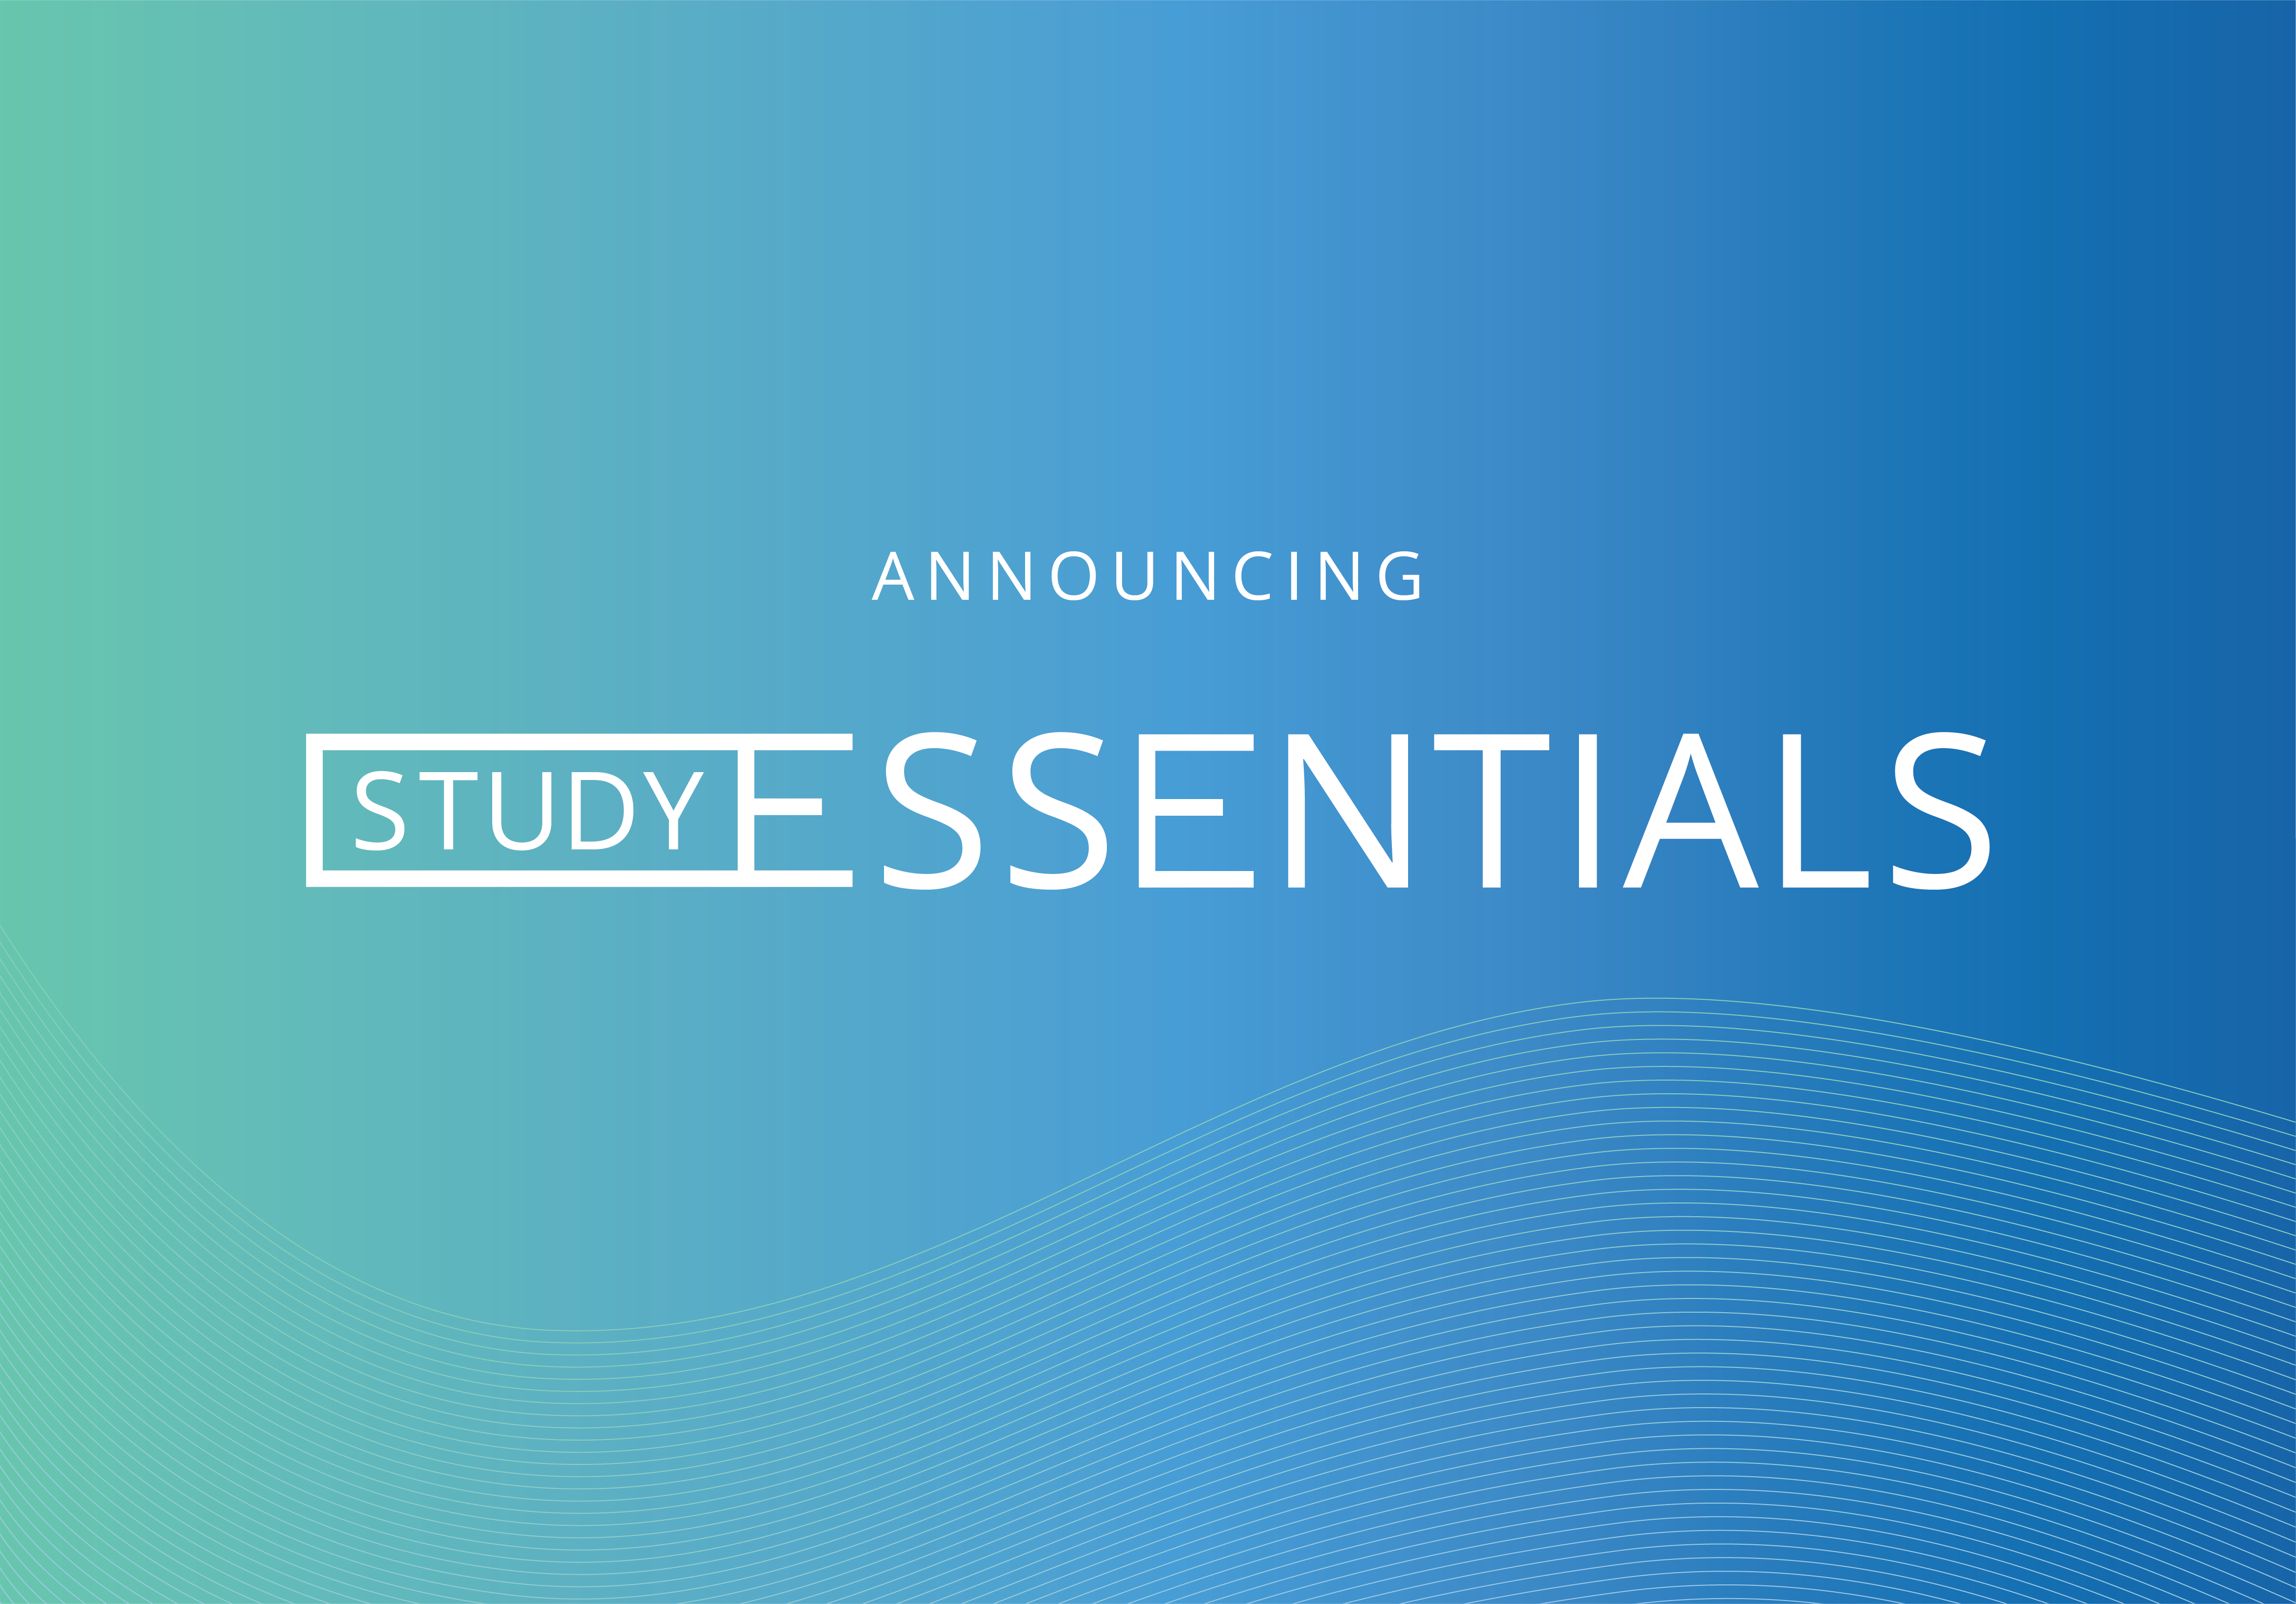 How to Improve Your Study Habits: Study Essentials